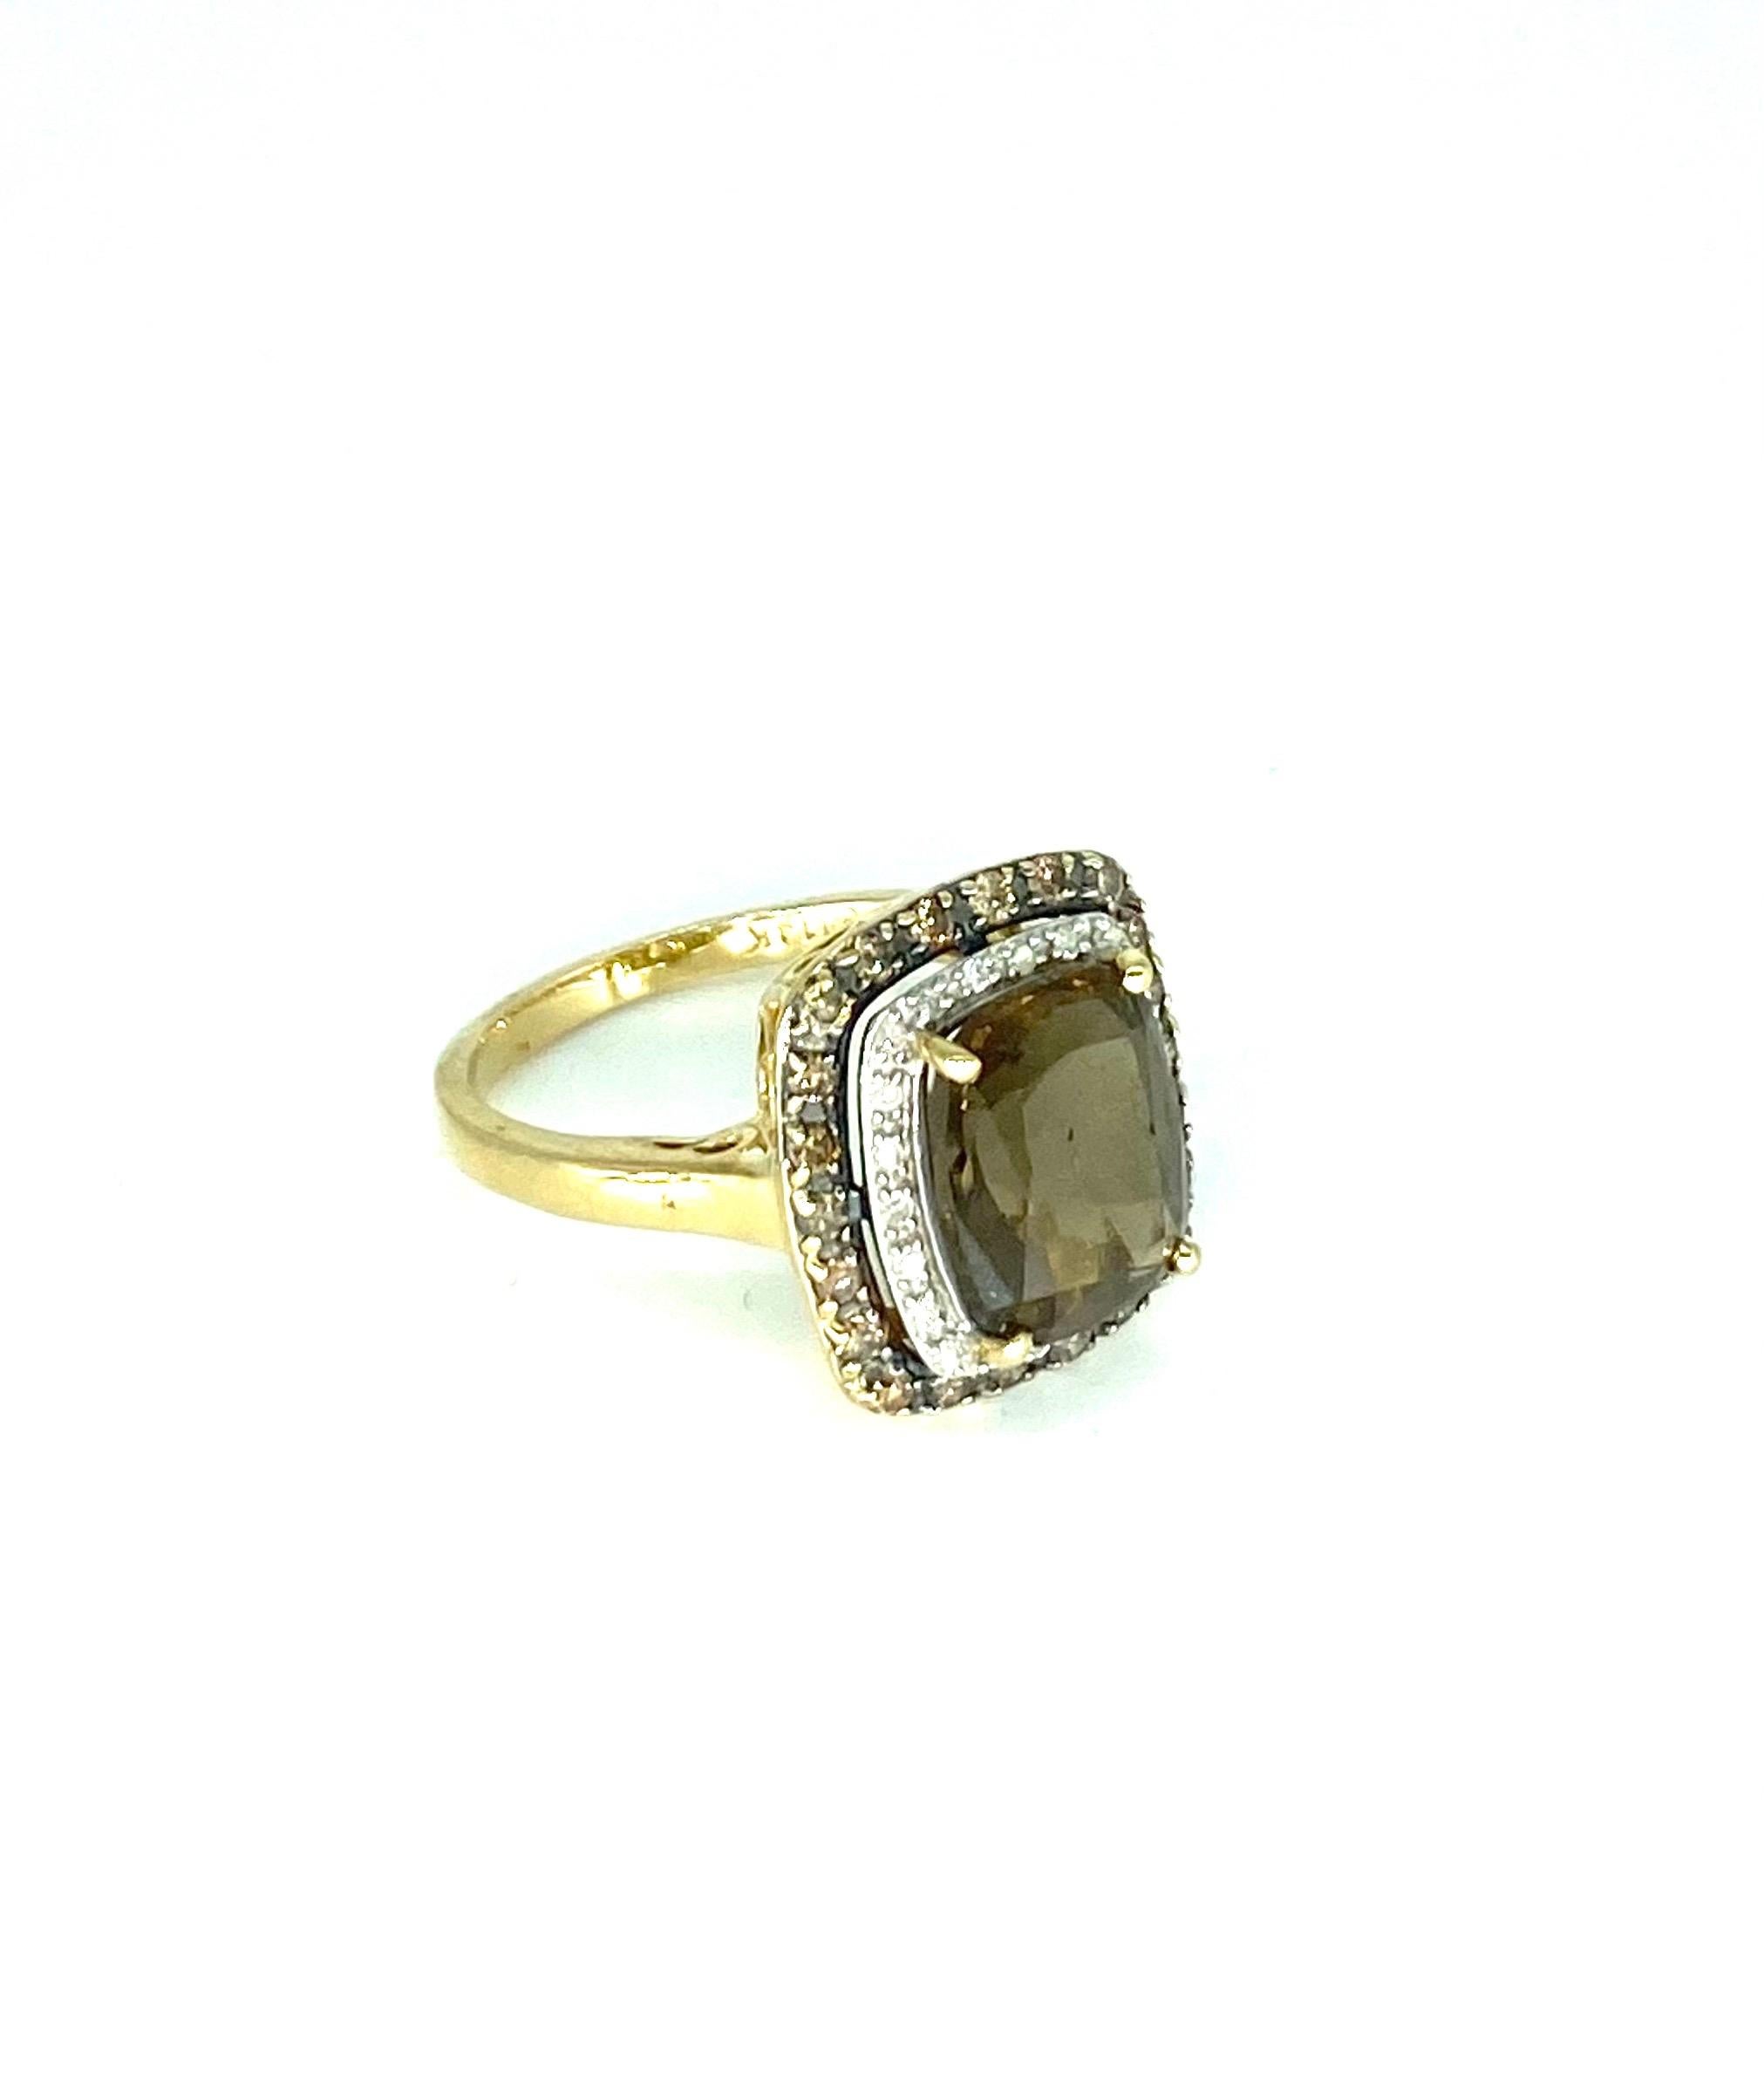 Round Cut Vintage 3.50 Carat Smokey Quartz with White & Fancy Brown Diamonds Cluster Ring For Sale